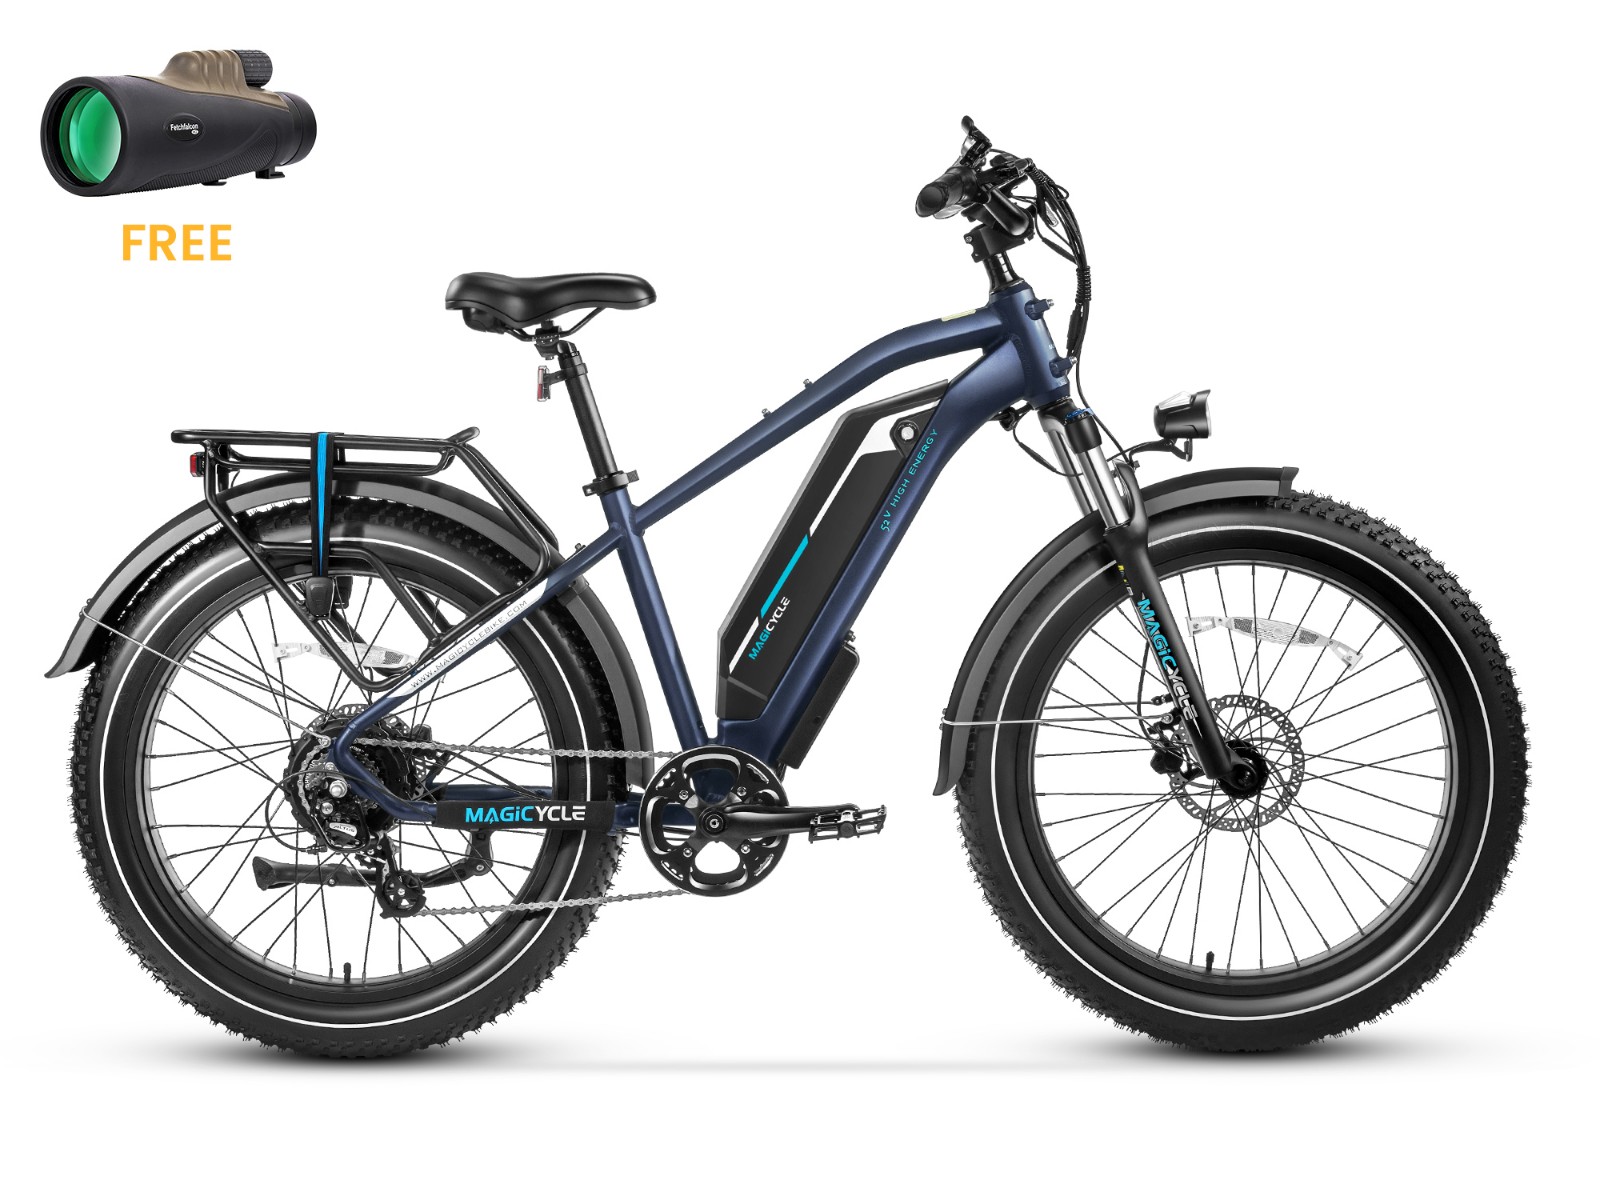 MAGICYCLE 52V 15 Ah Cruiser All Terrain Fat Tire Electric Bike Midnight Blue - Canada Only